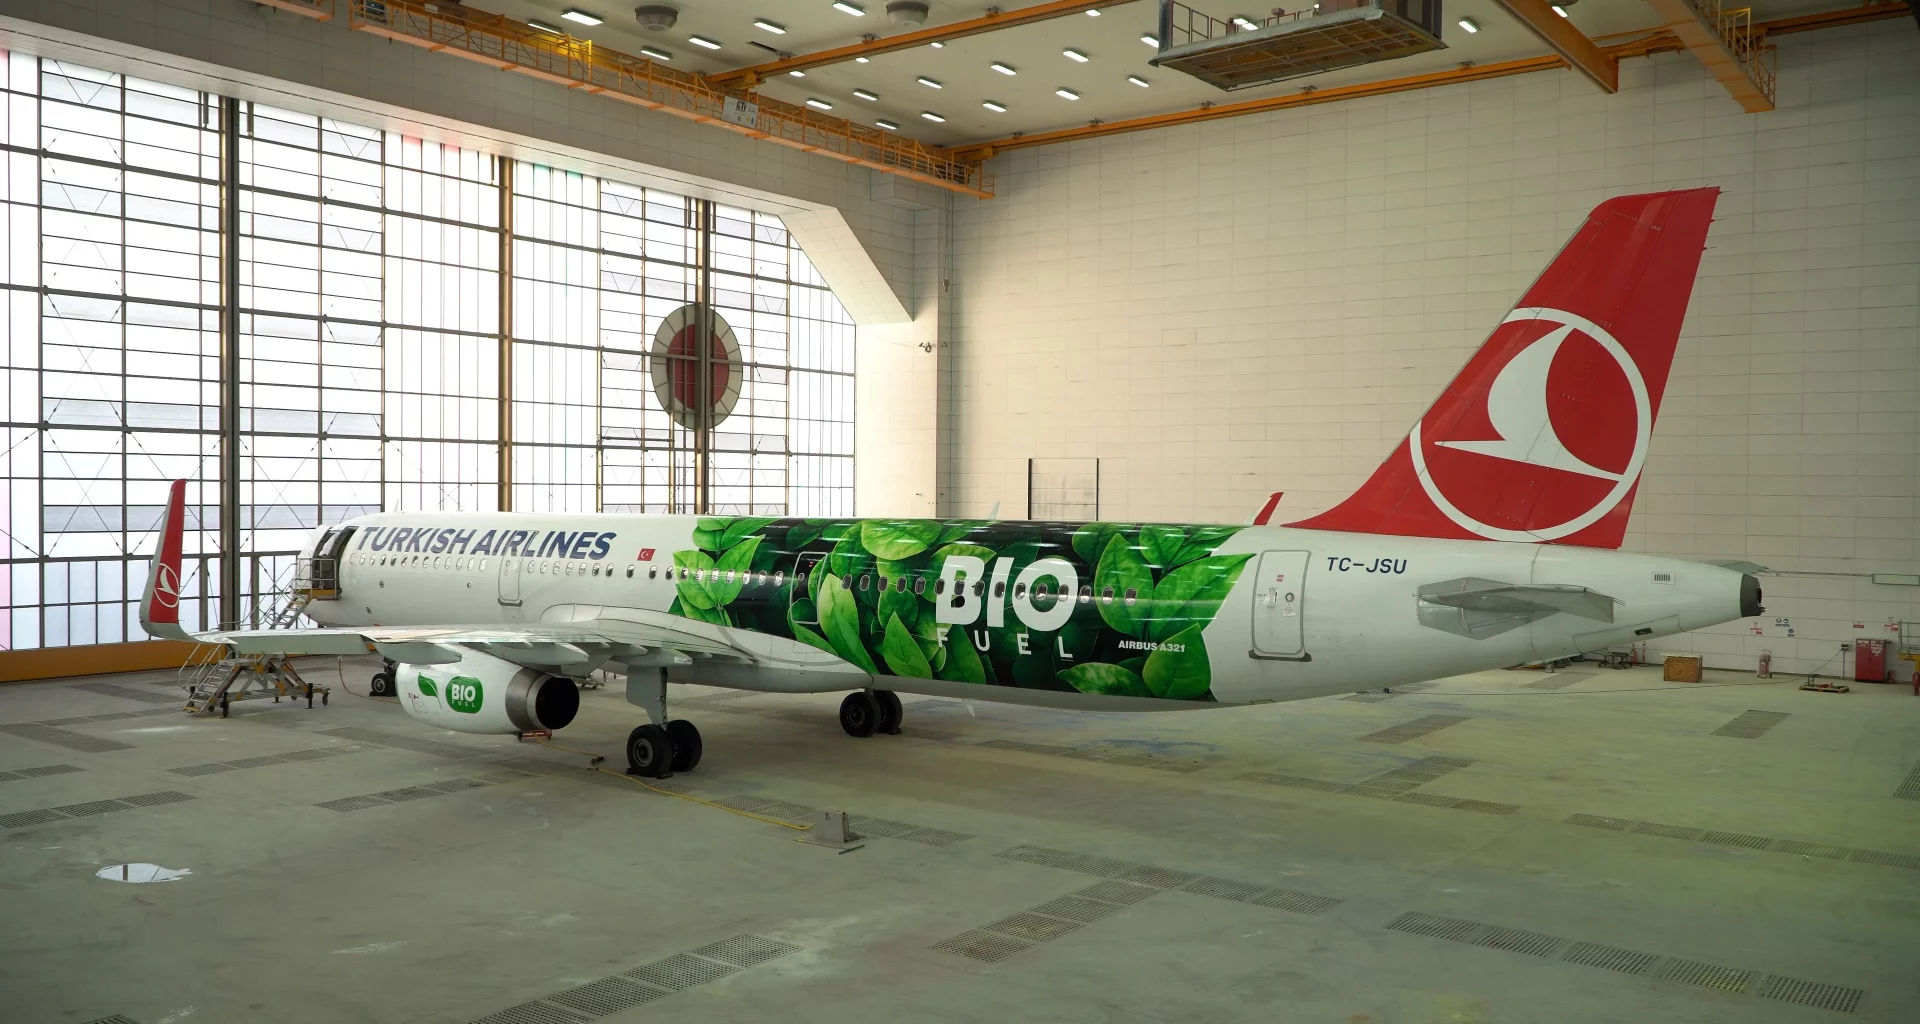 Turkish Airlines biofuel livery